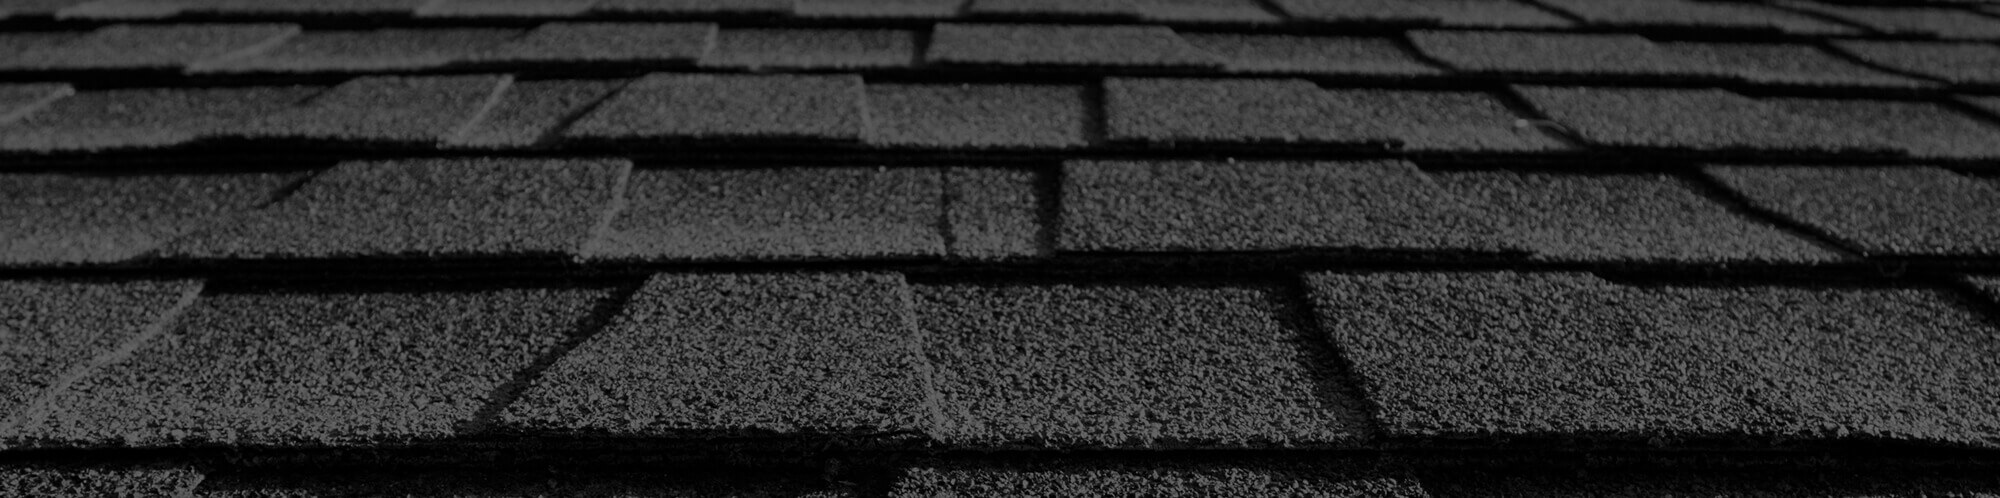 Asphalt roof installation for newly constructed properties in Green Bay area